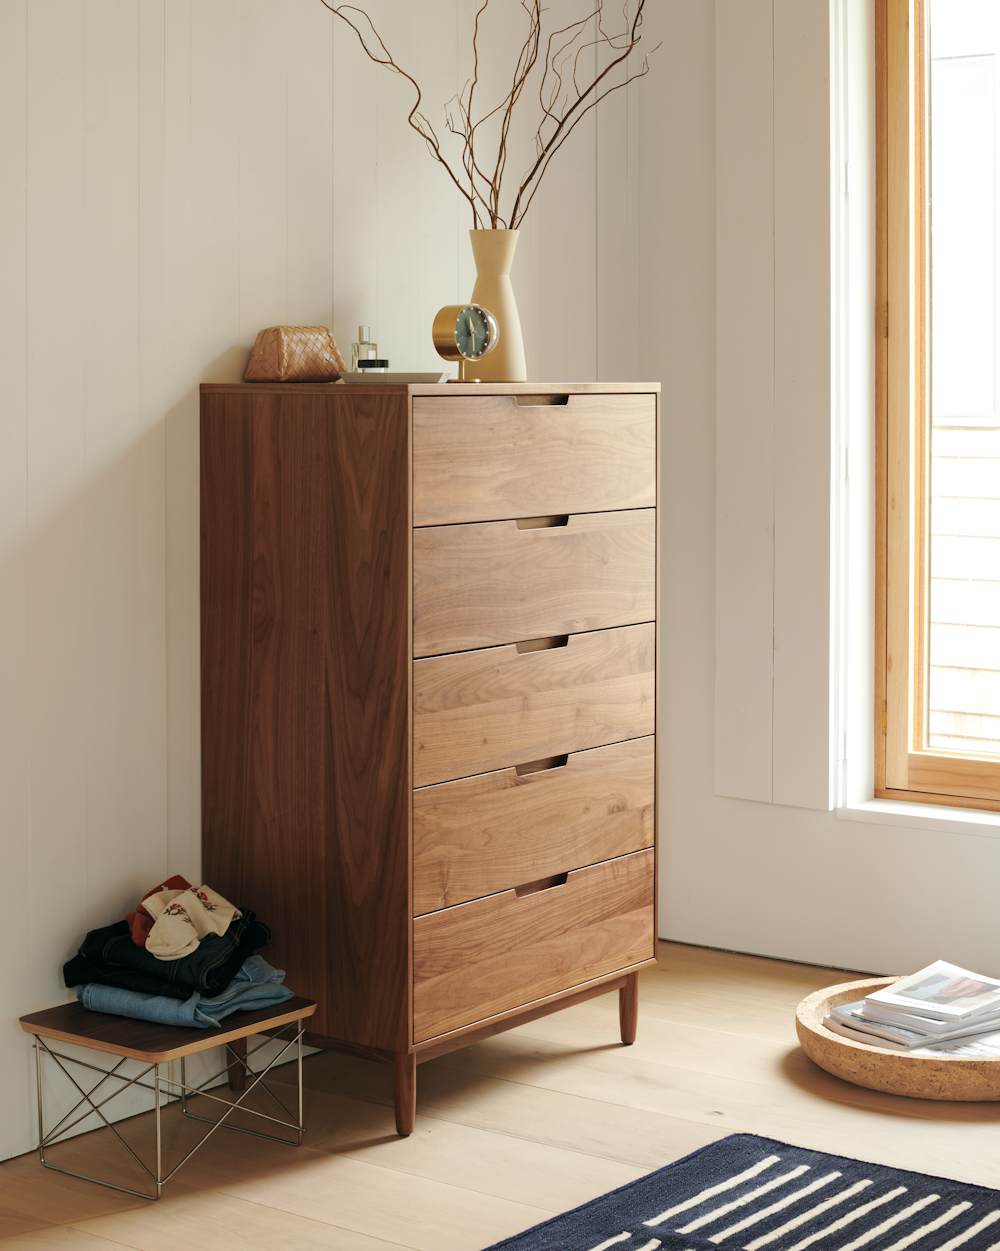 Raleigh Dresser in a bedroom setting